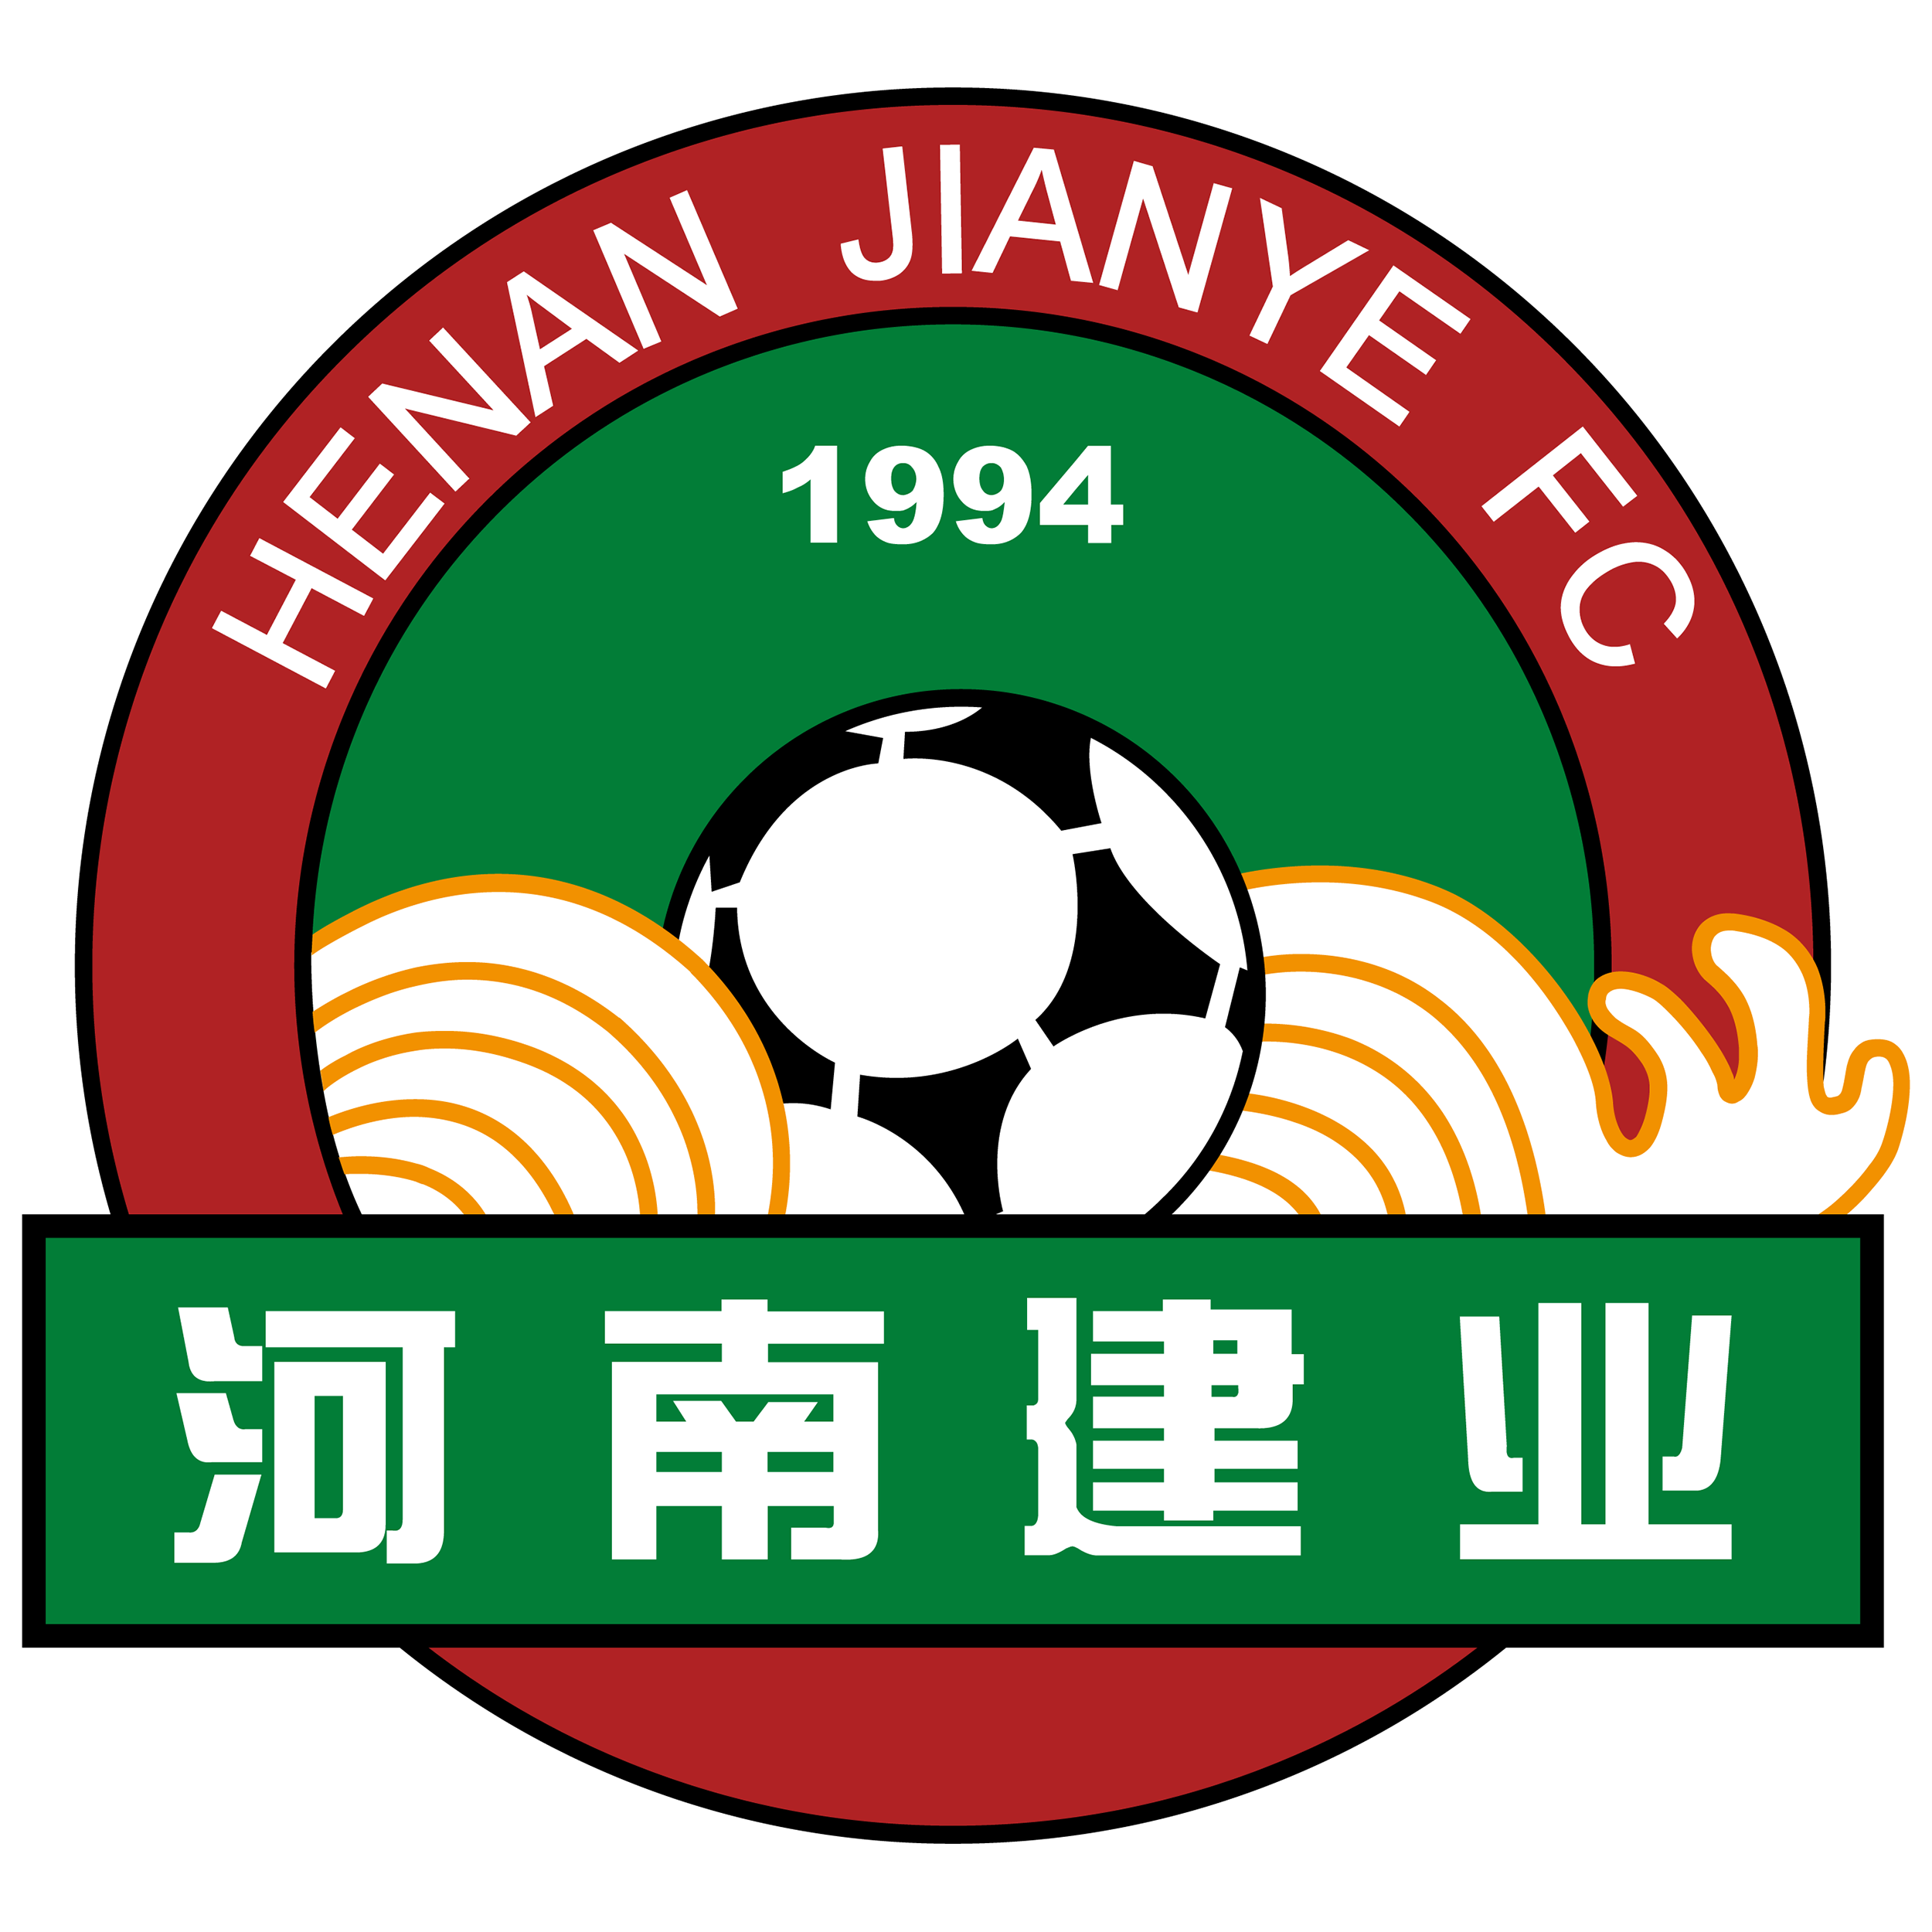 Henan Jianye vs Wuhan Three Towns Prediction: Are The Red Devils The Answer To Putting A Stop To The Visitors Dominant Form?